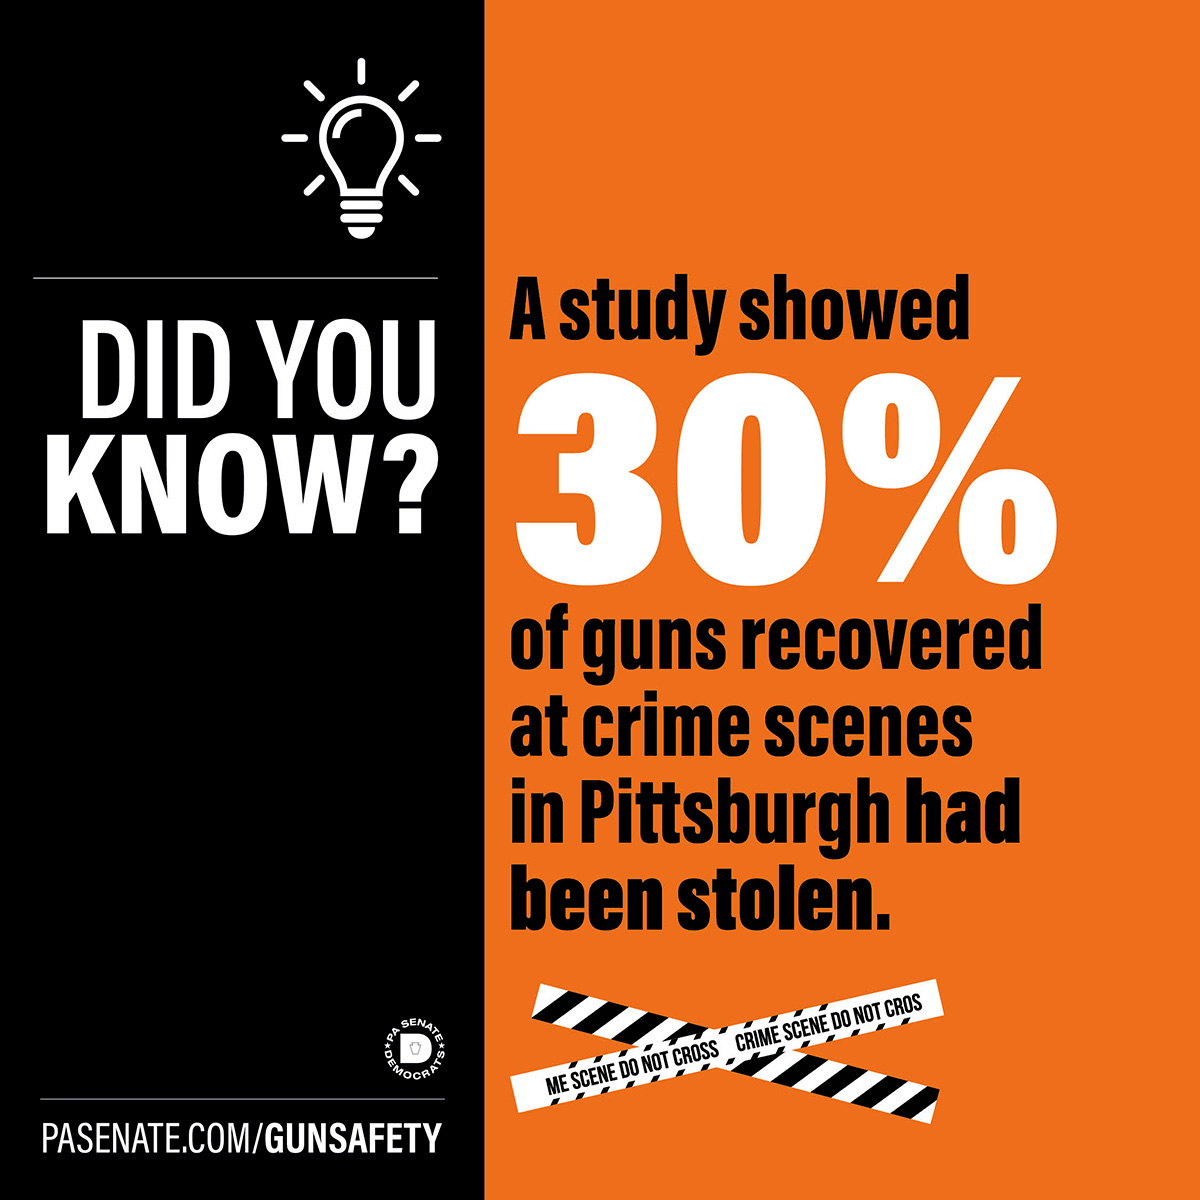 Did you know? A study showed 30% of guns recovered at a crime scenes in Pittsburgh had been stolen.